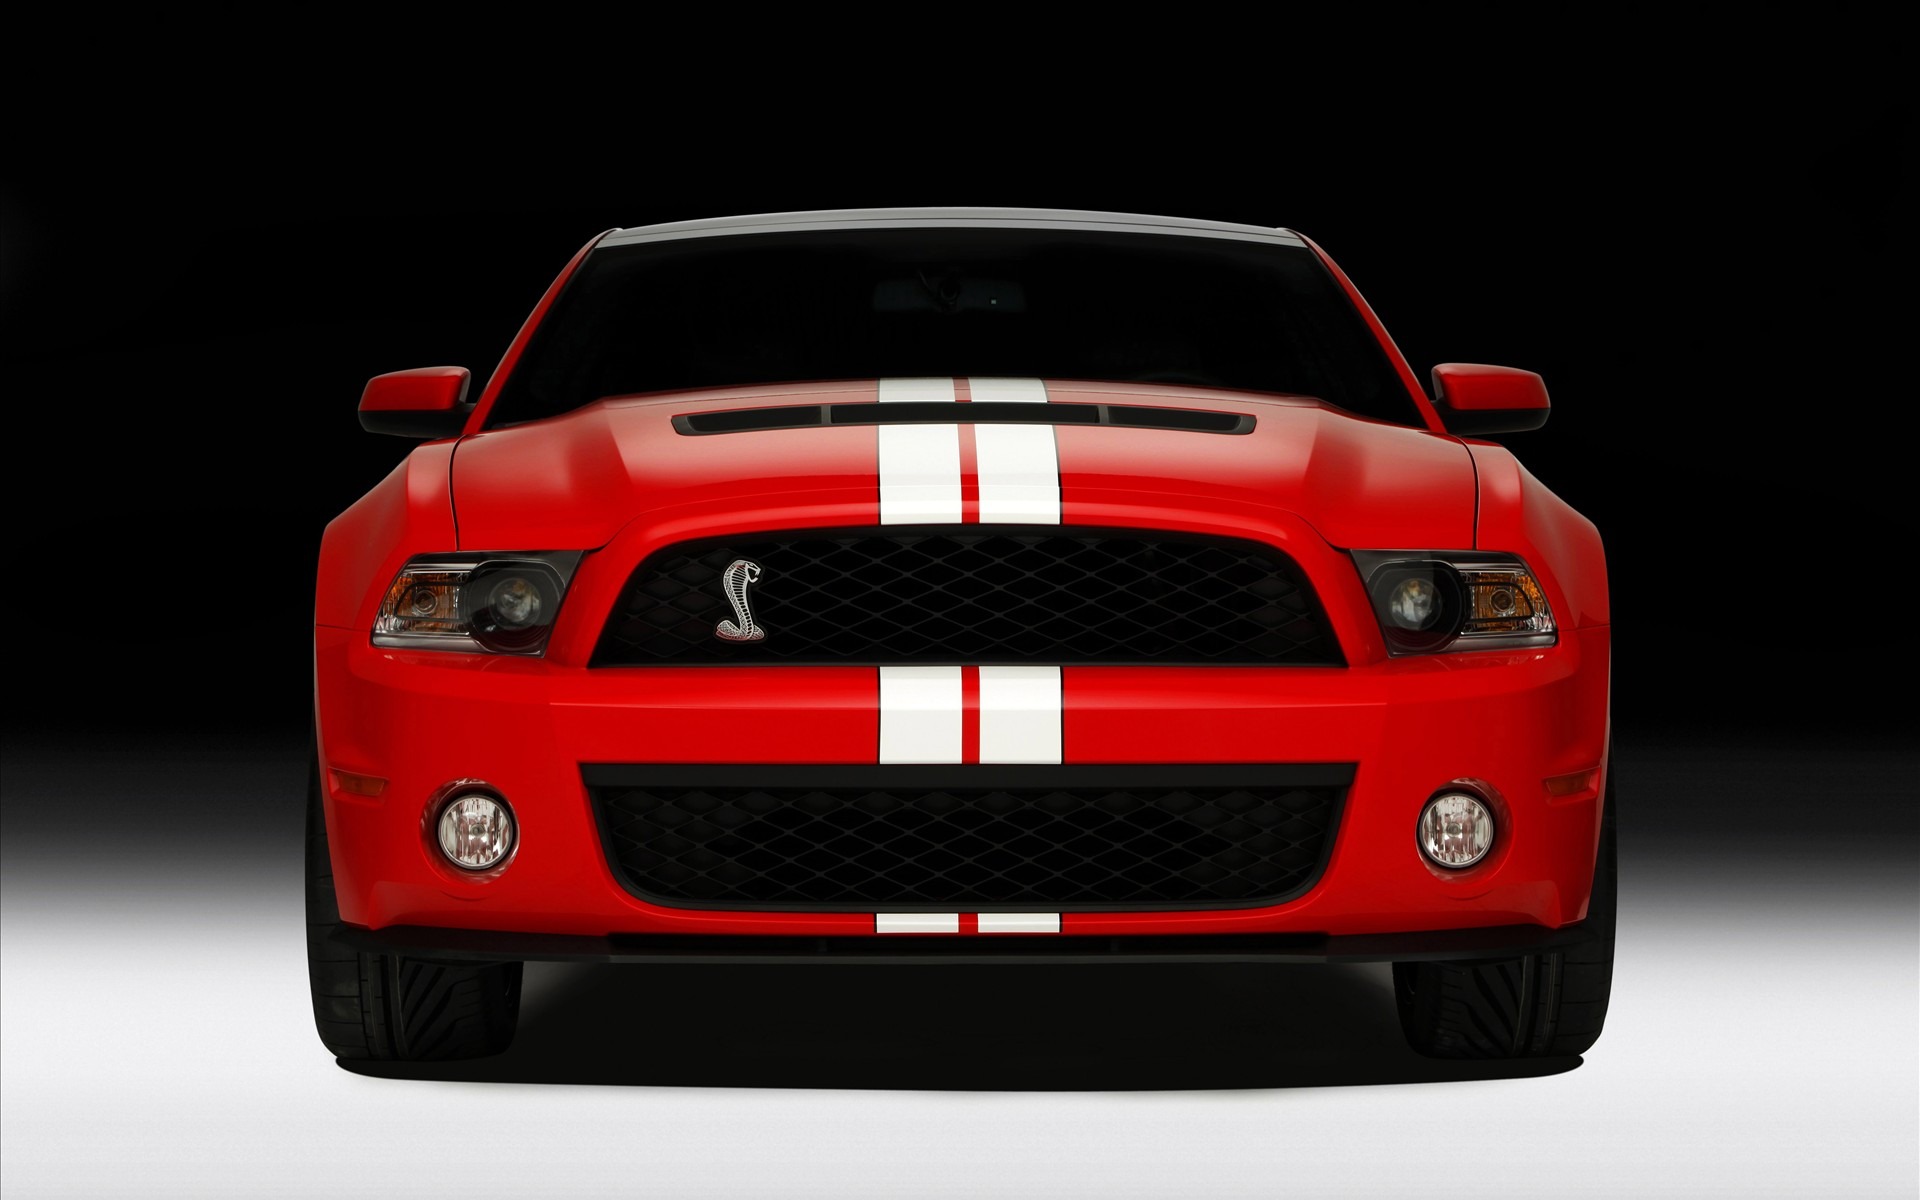 Ford Mustang GT500 Wallpapers #5 - 1920x1200